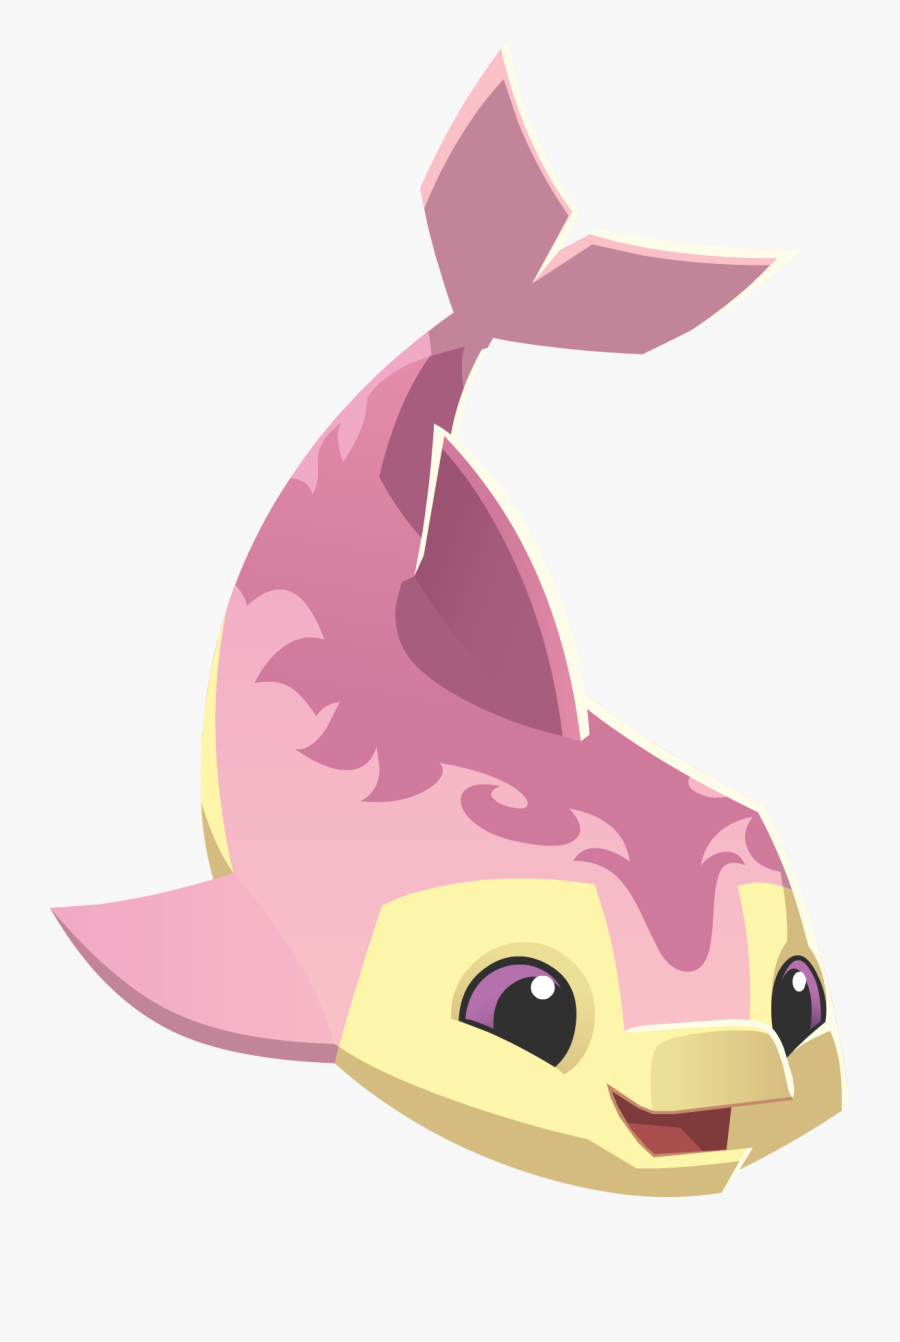 Image And Yellow Graphic - Animal Jam Dolphin Png, Transparent Clipart